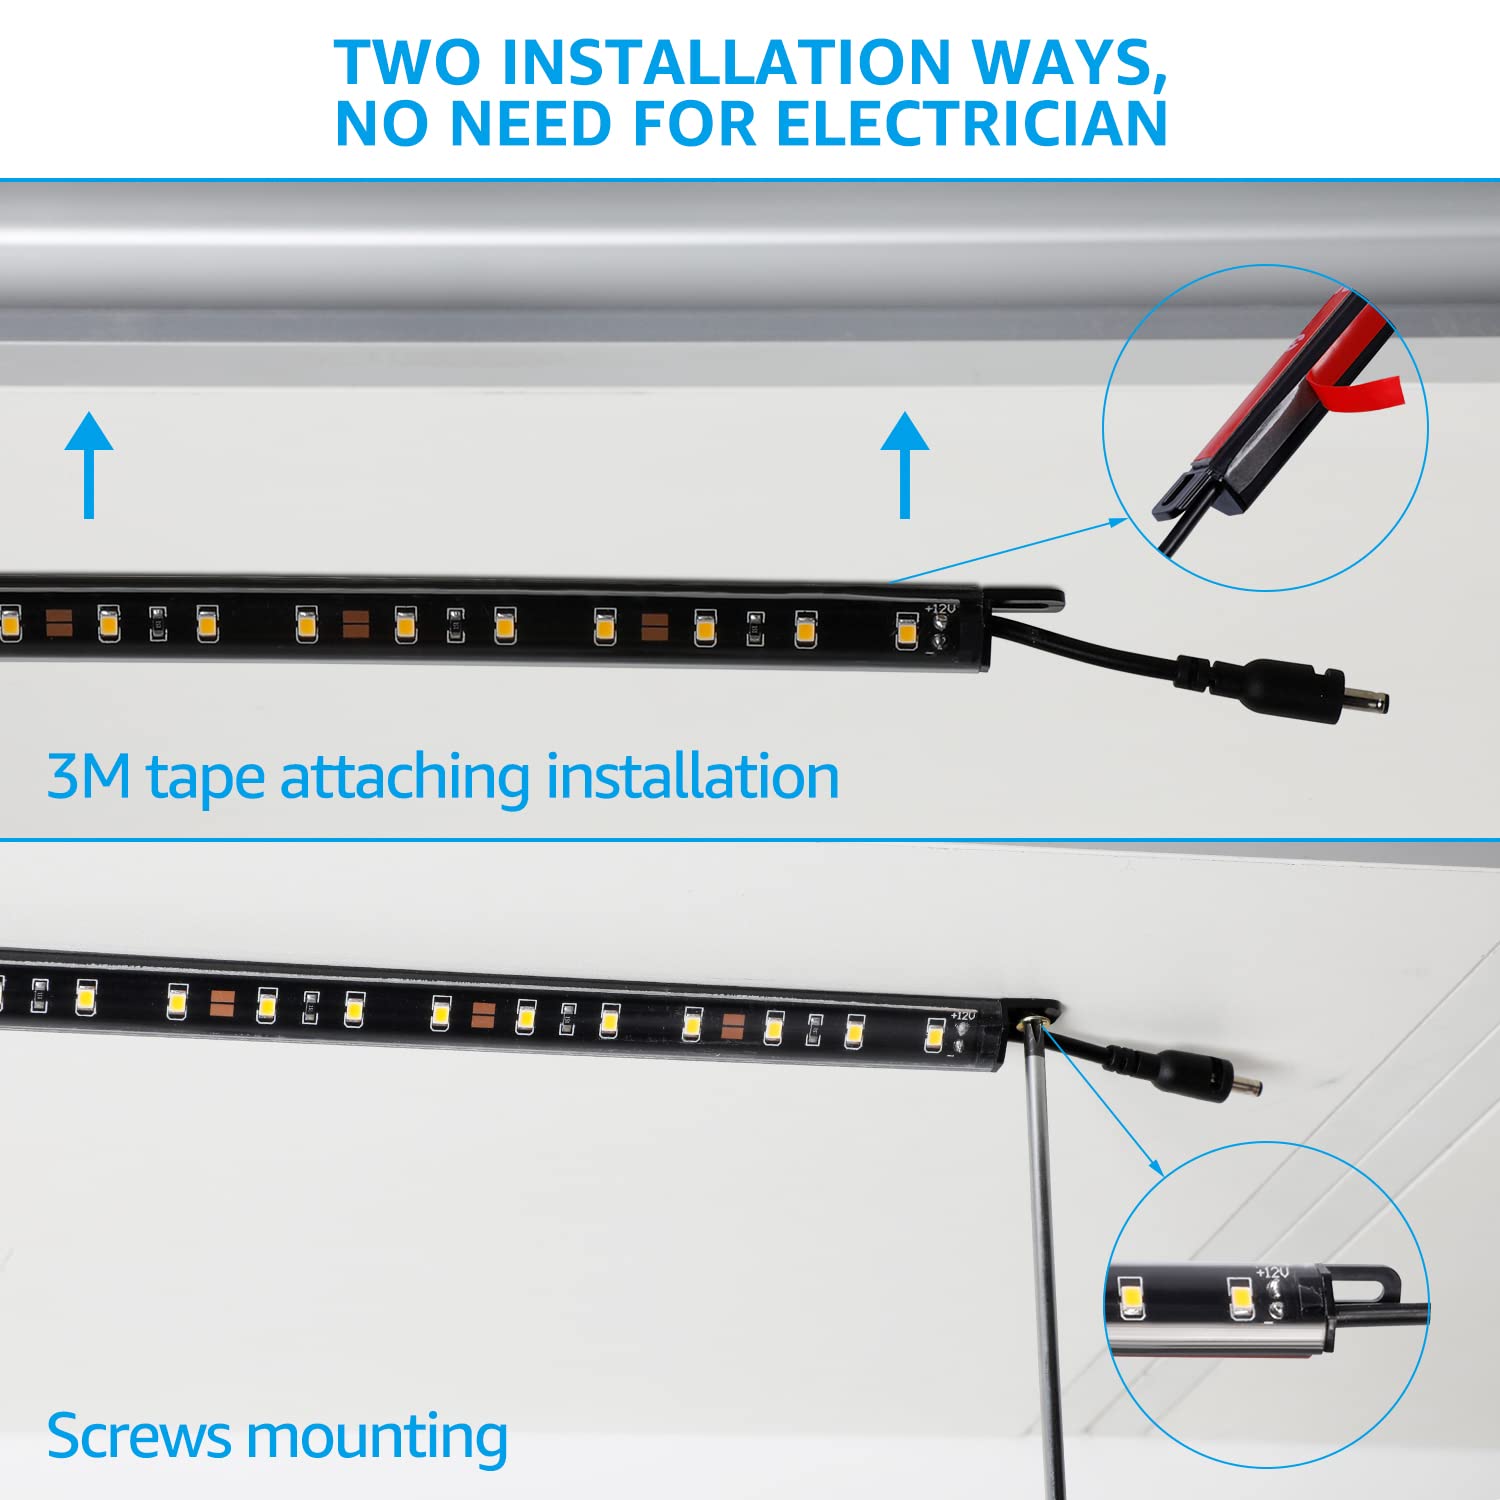 TORCHSTAR Smart LED Safe Lighting Kit, Voice & APP Control (6) 12 Inch Dimmable Linkable Light Bars, Compatible with Alexa, 900LM, 100-240V, for Under Cabinet Display Closet Showcase, 5000K Daylight